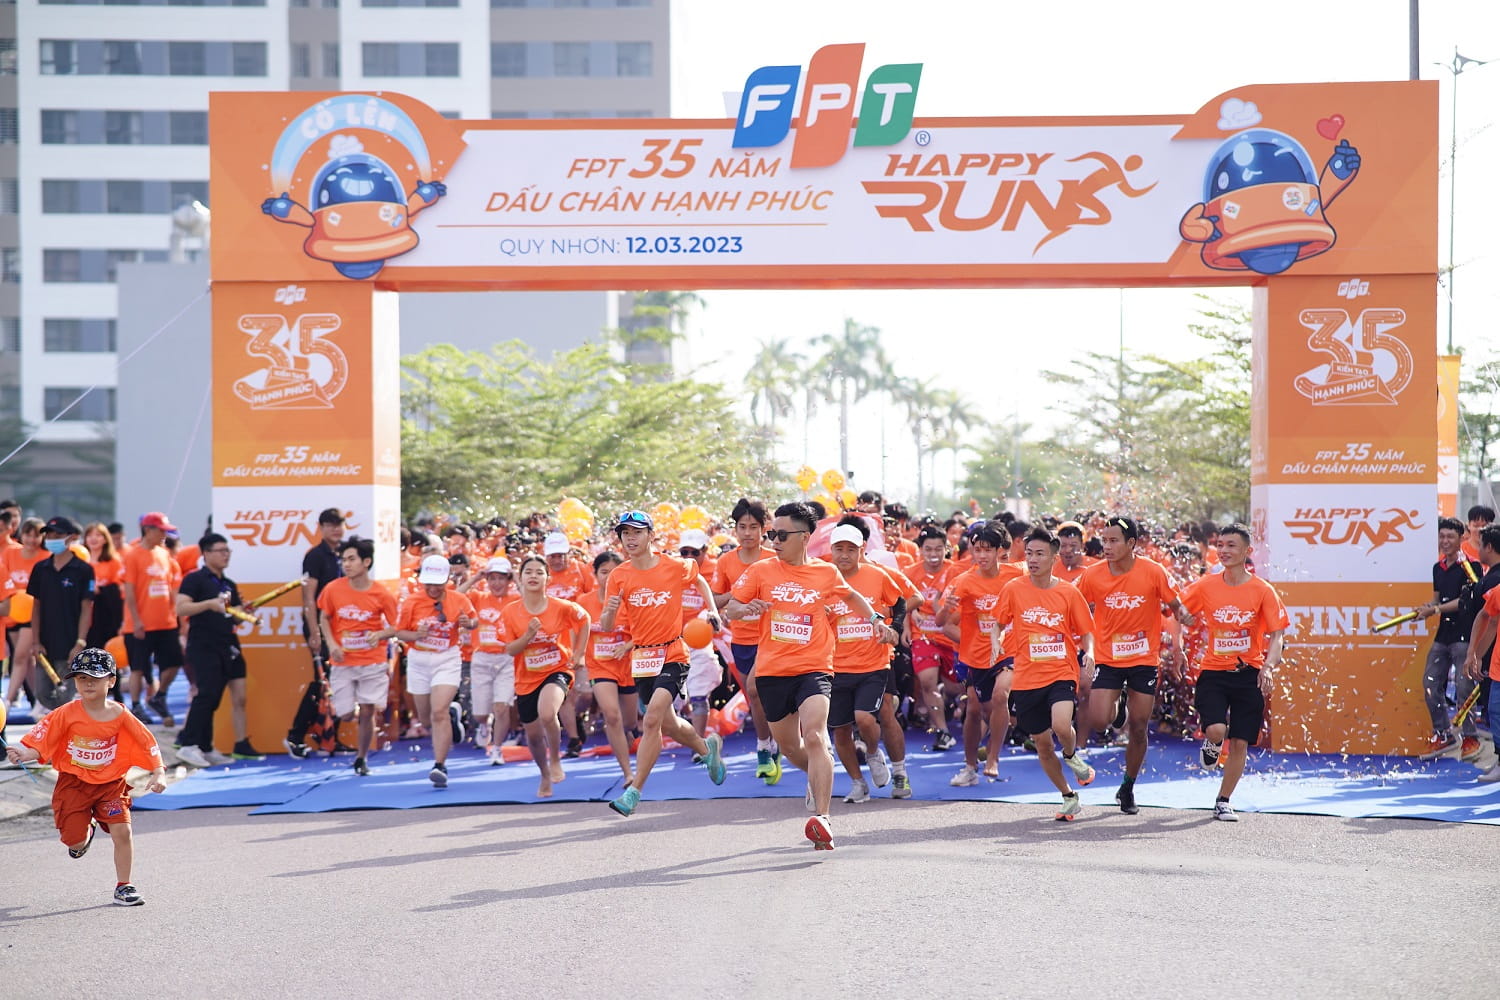 2,500 people took part in the "FPT Happy Run 2023" in Quy Nhon